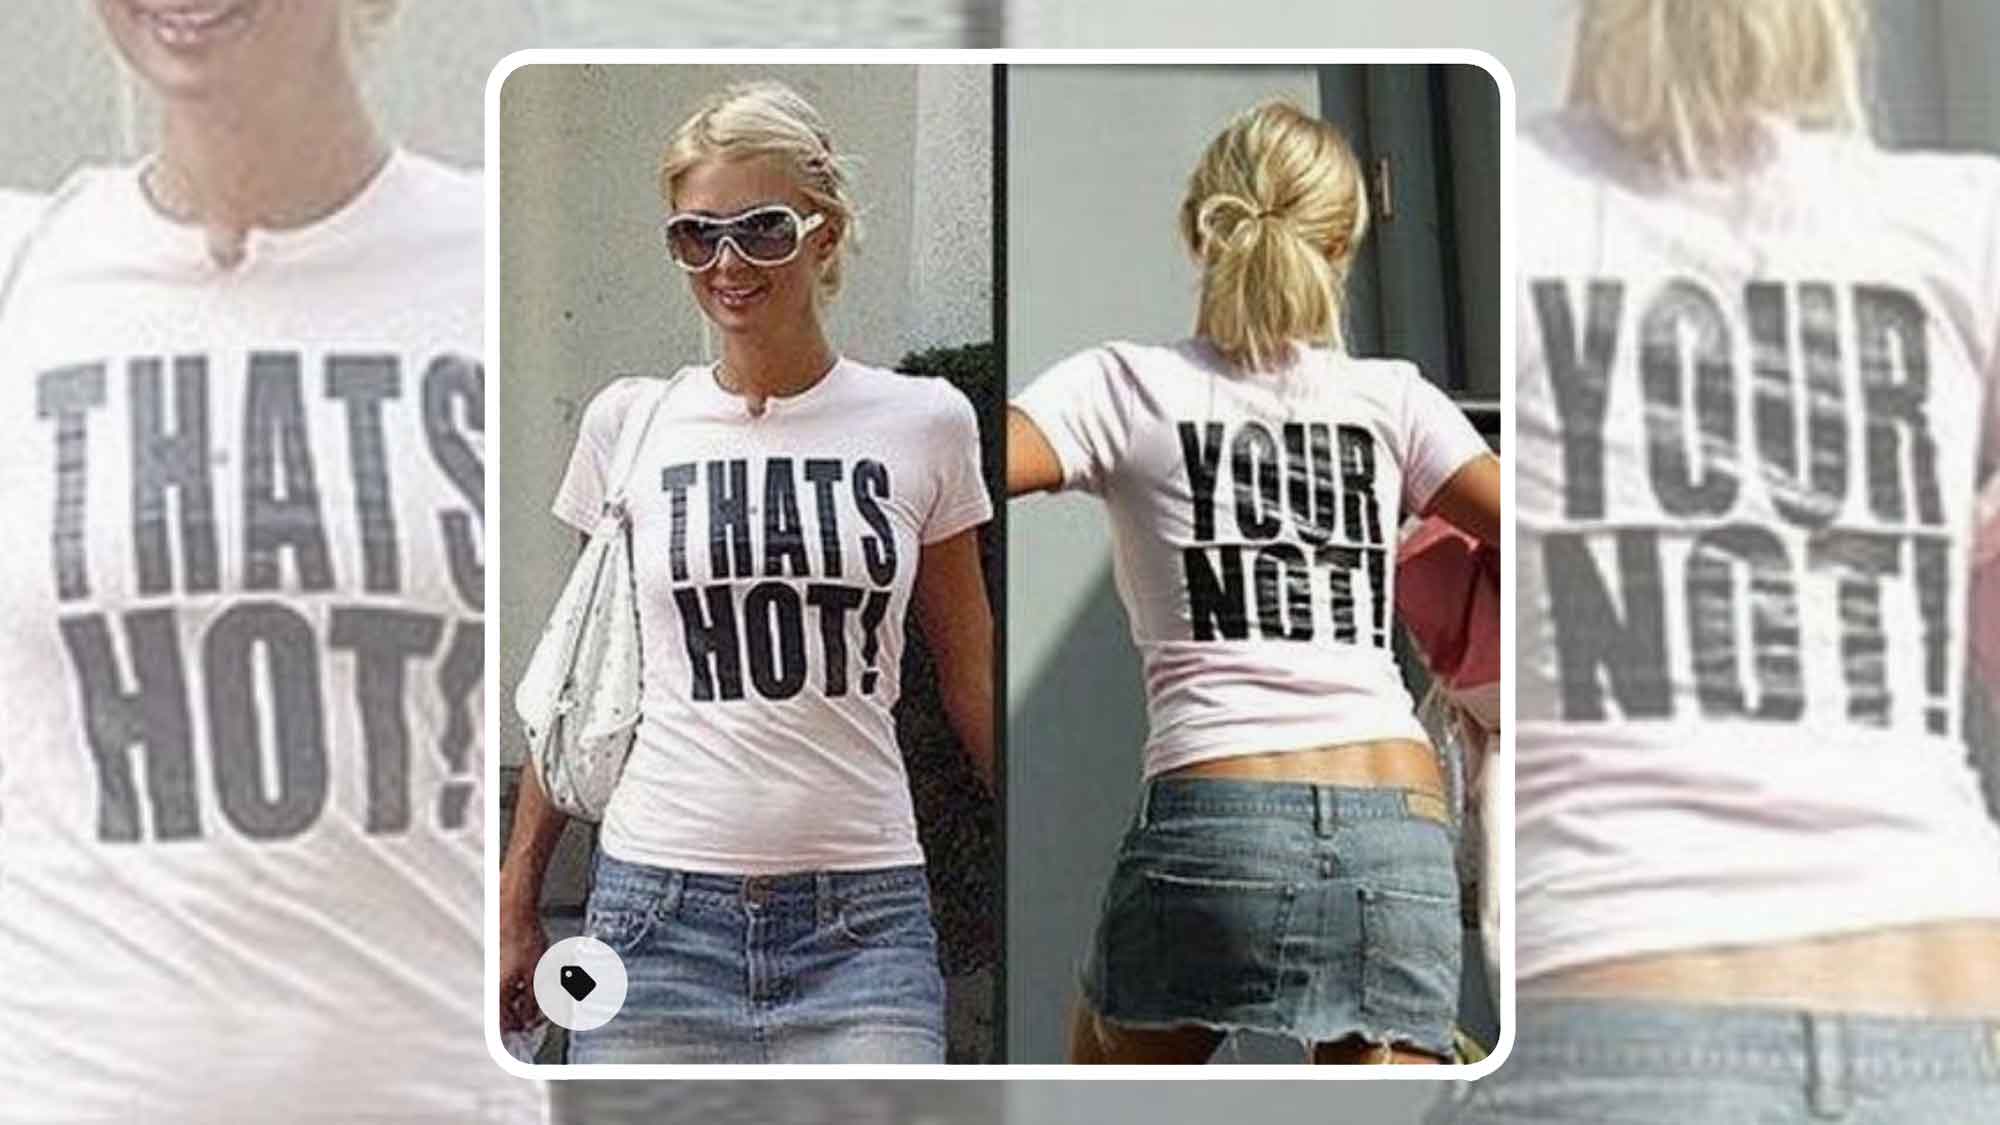 Add Another Incident To The List Of Paris Hilton Dumb Moments: The Your vs You're T-Shirt